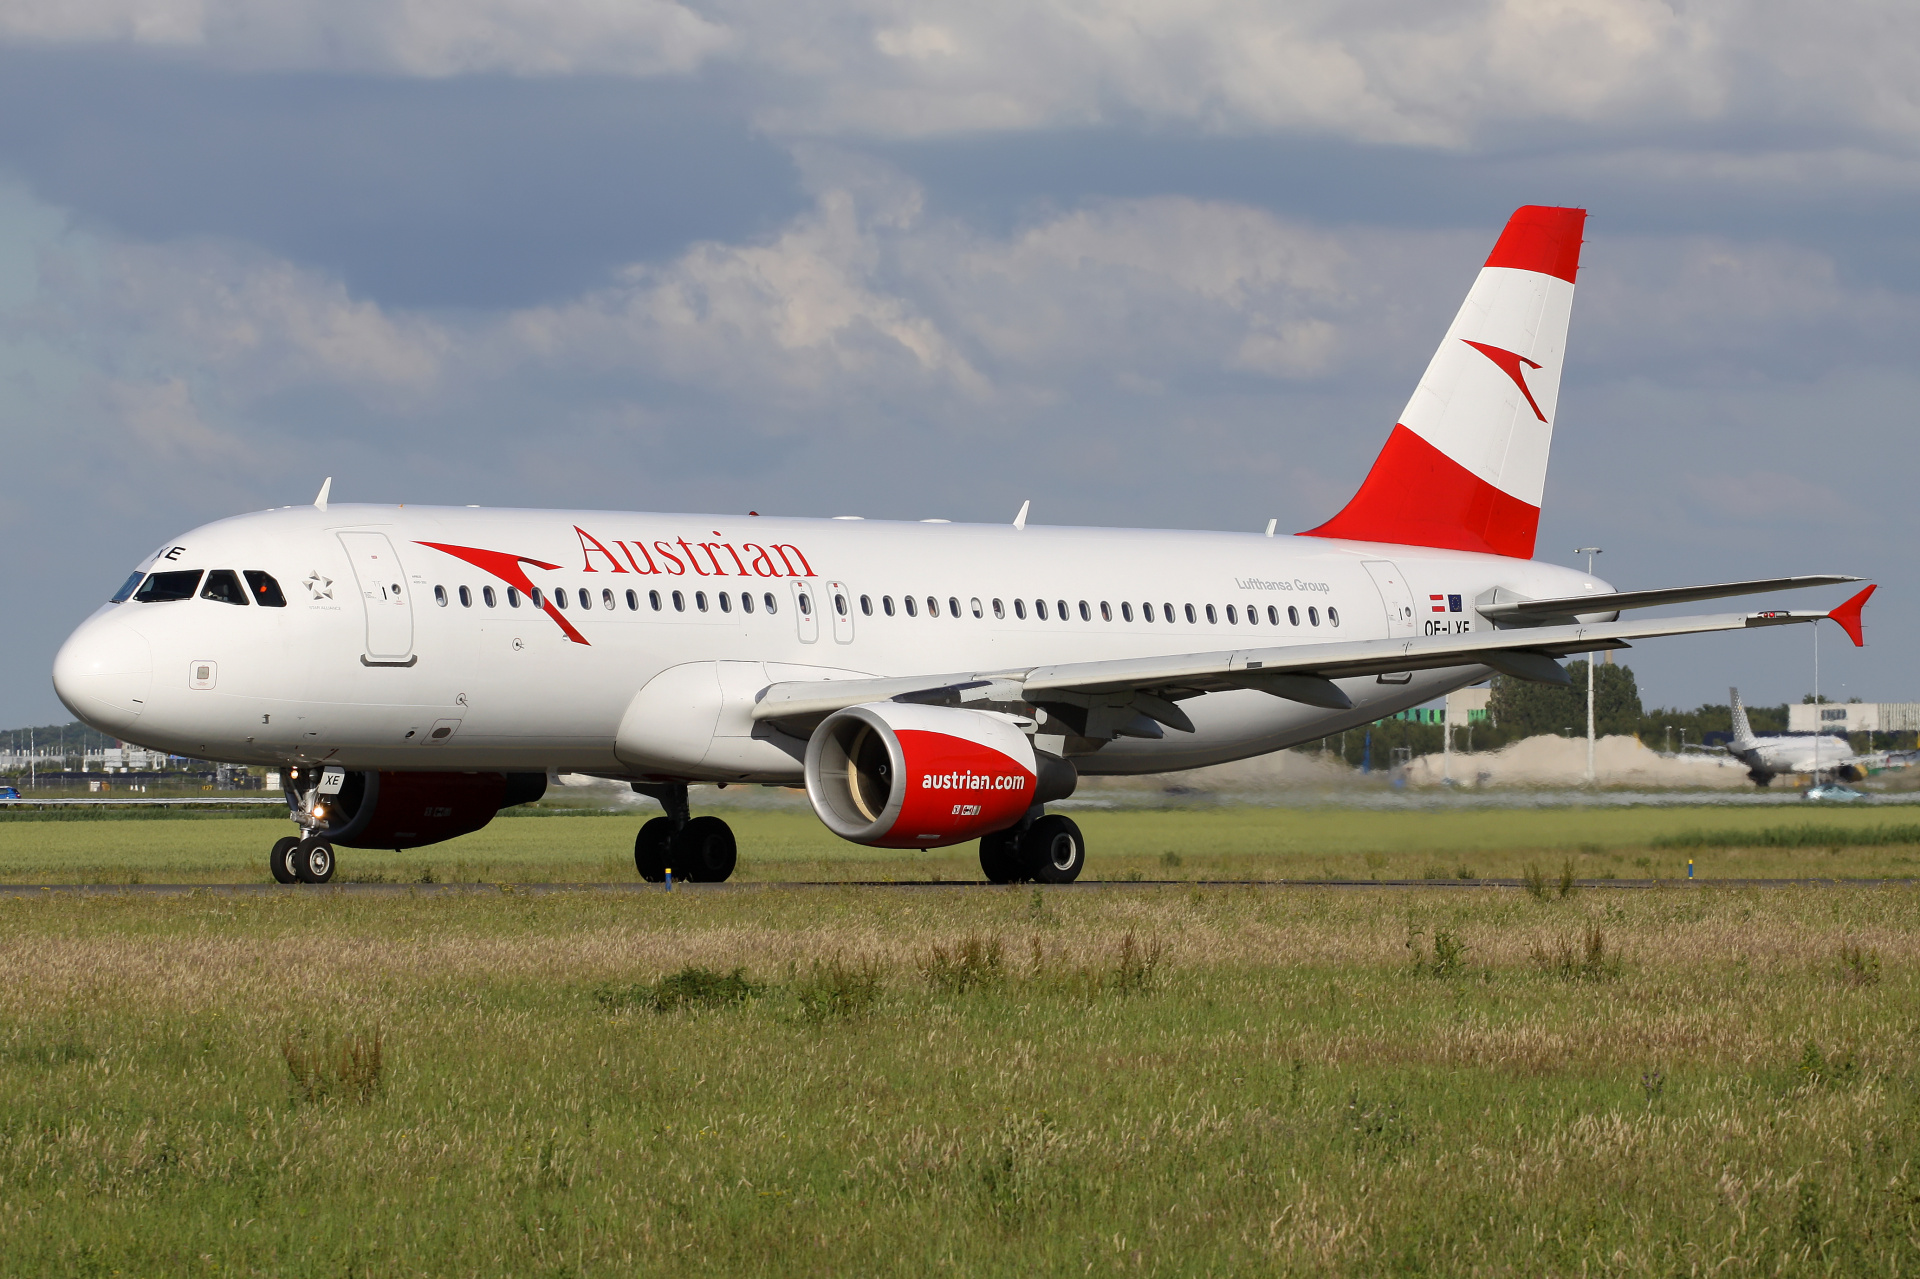 OE-LXE, Austrian Airlines (Aircraft » Schiphol Spotting » Airbus A320-200)